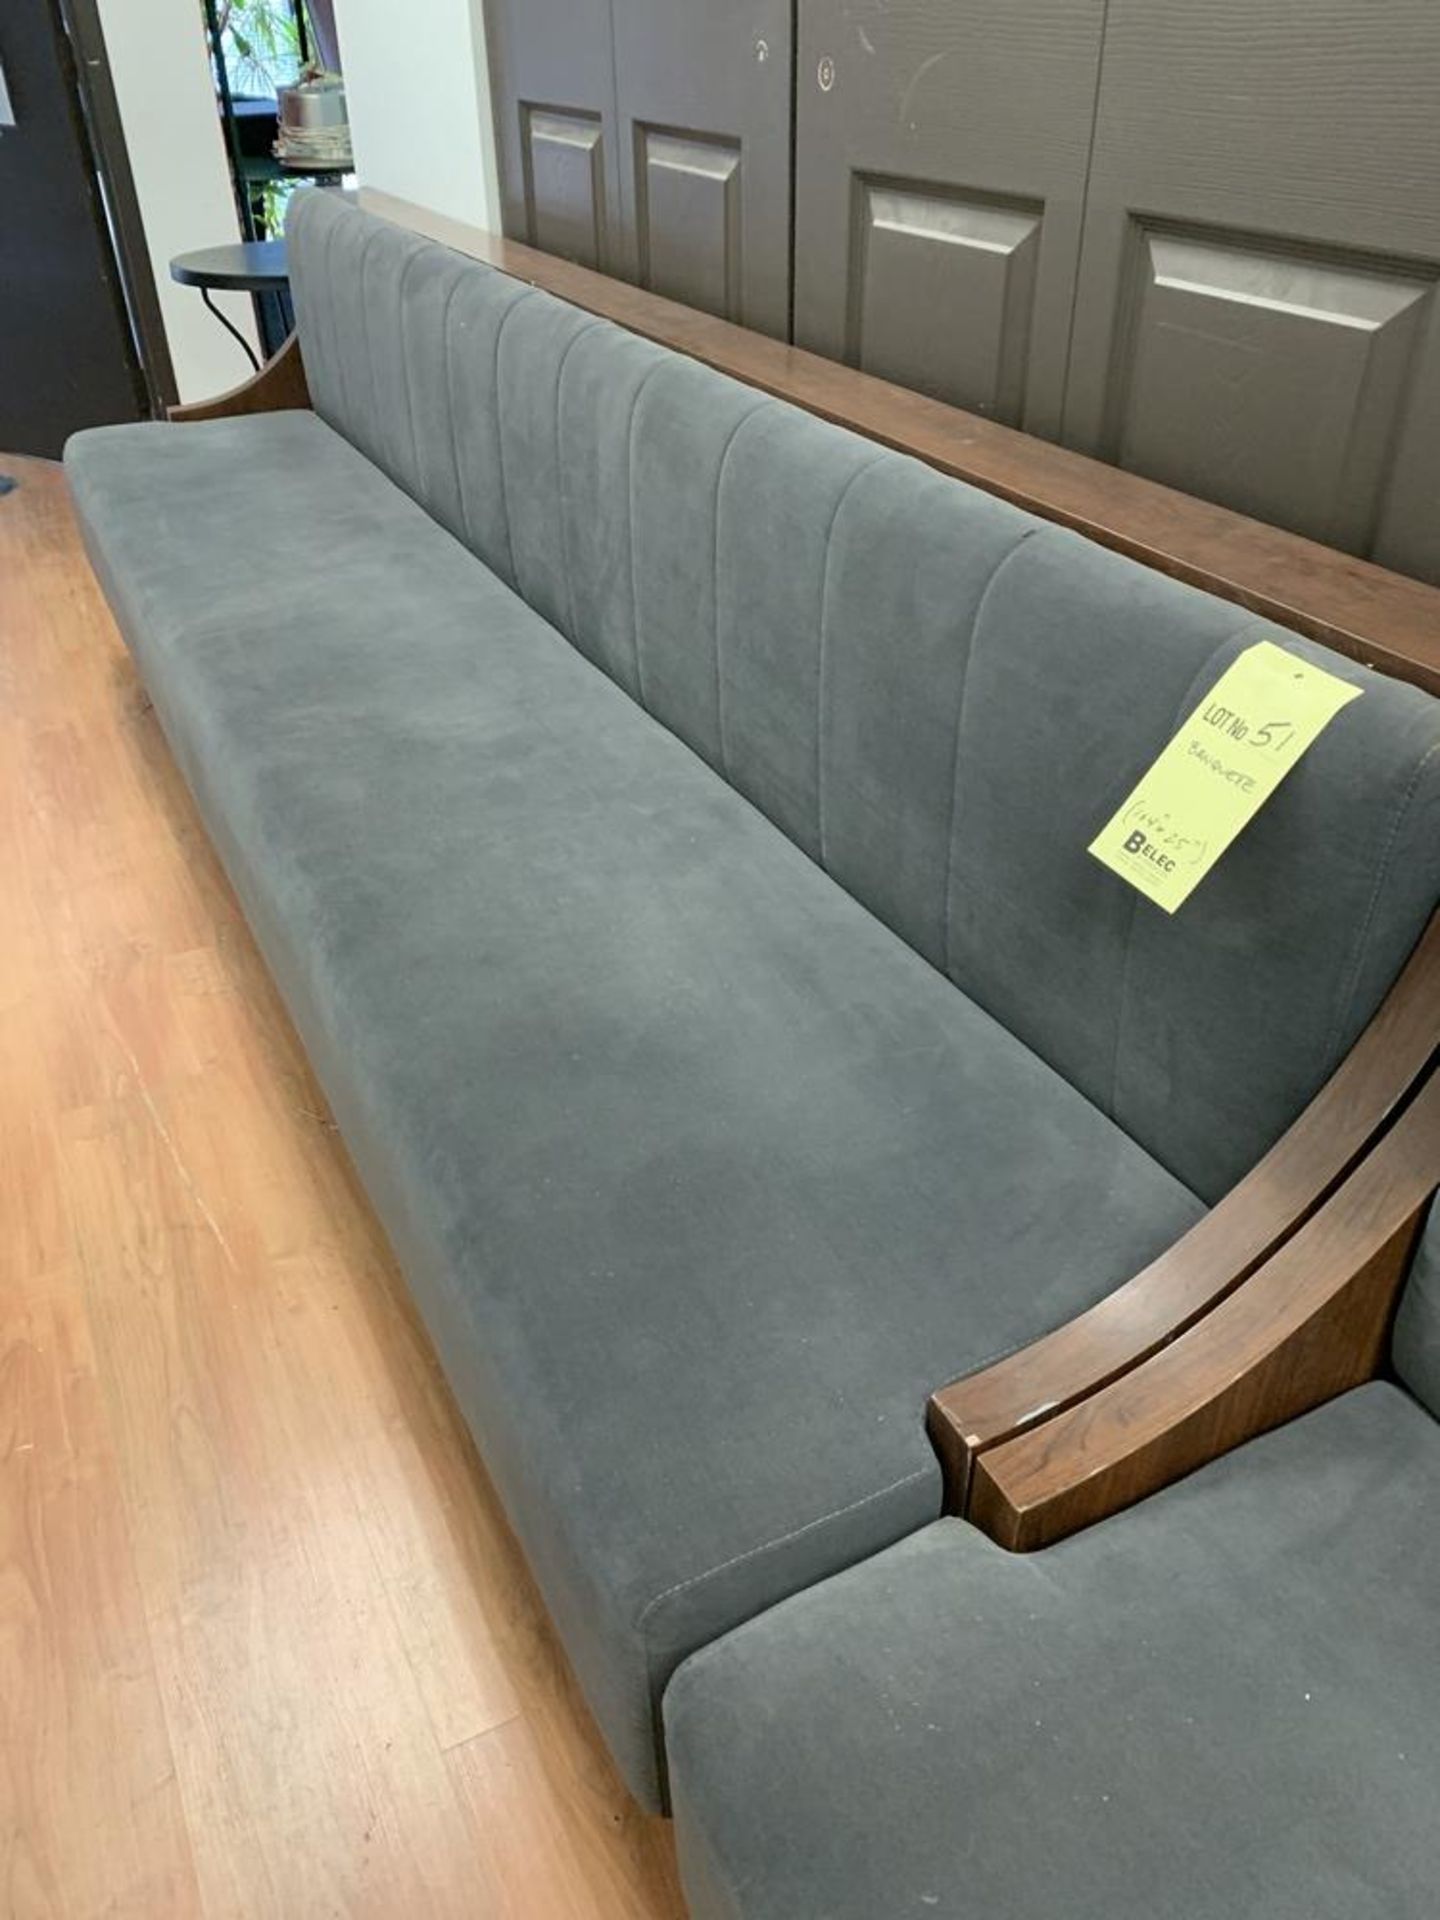 Banquette 104" x 25" - Image 2 of 2